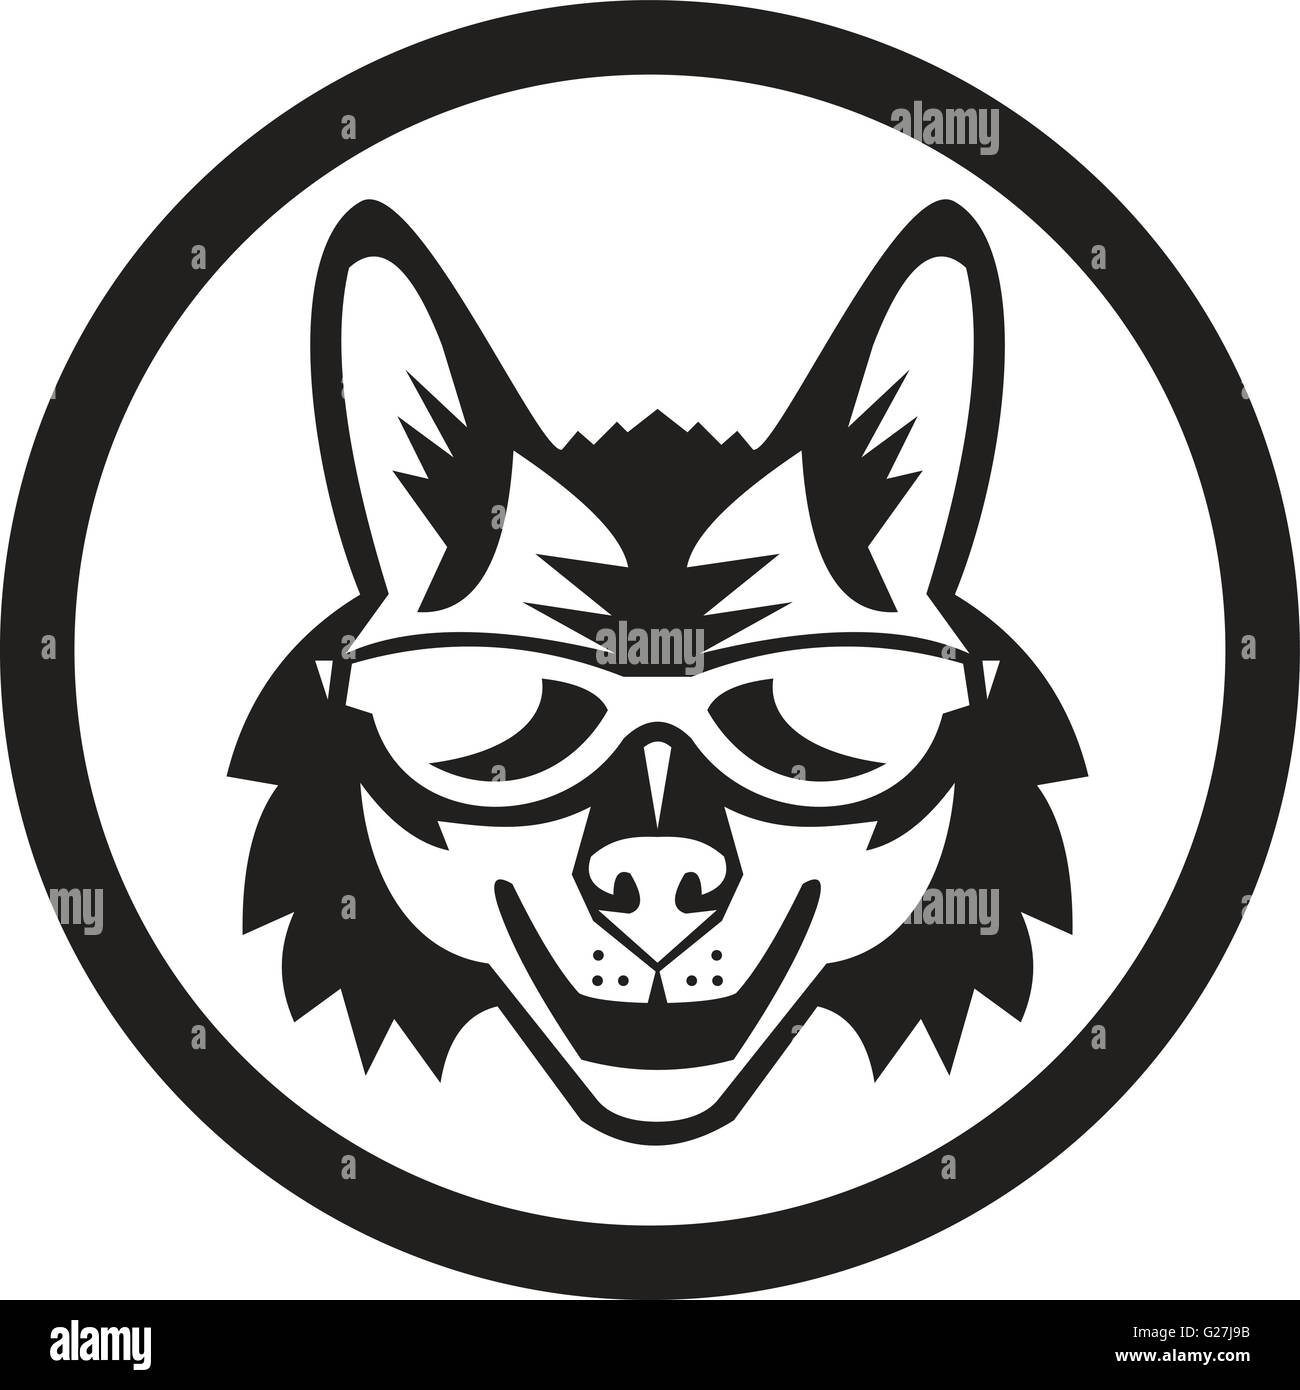 Furry Archive - That floof seems happy with their sun glasses :D -wolf-  https://www.furaffinity.net/view/39175265/ | Facebook